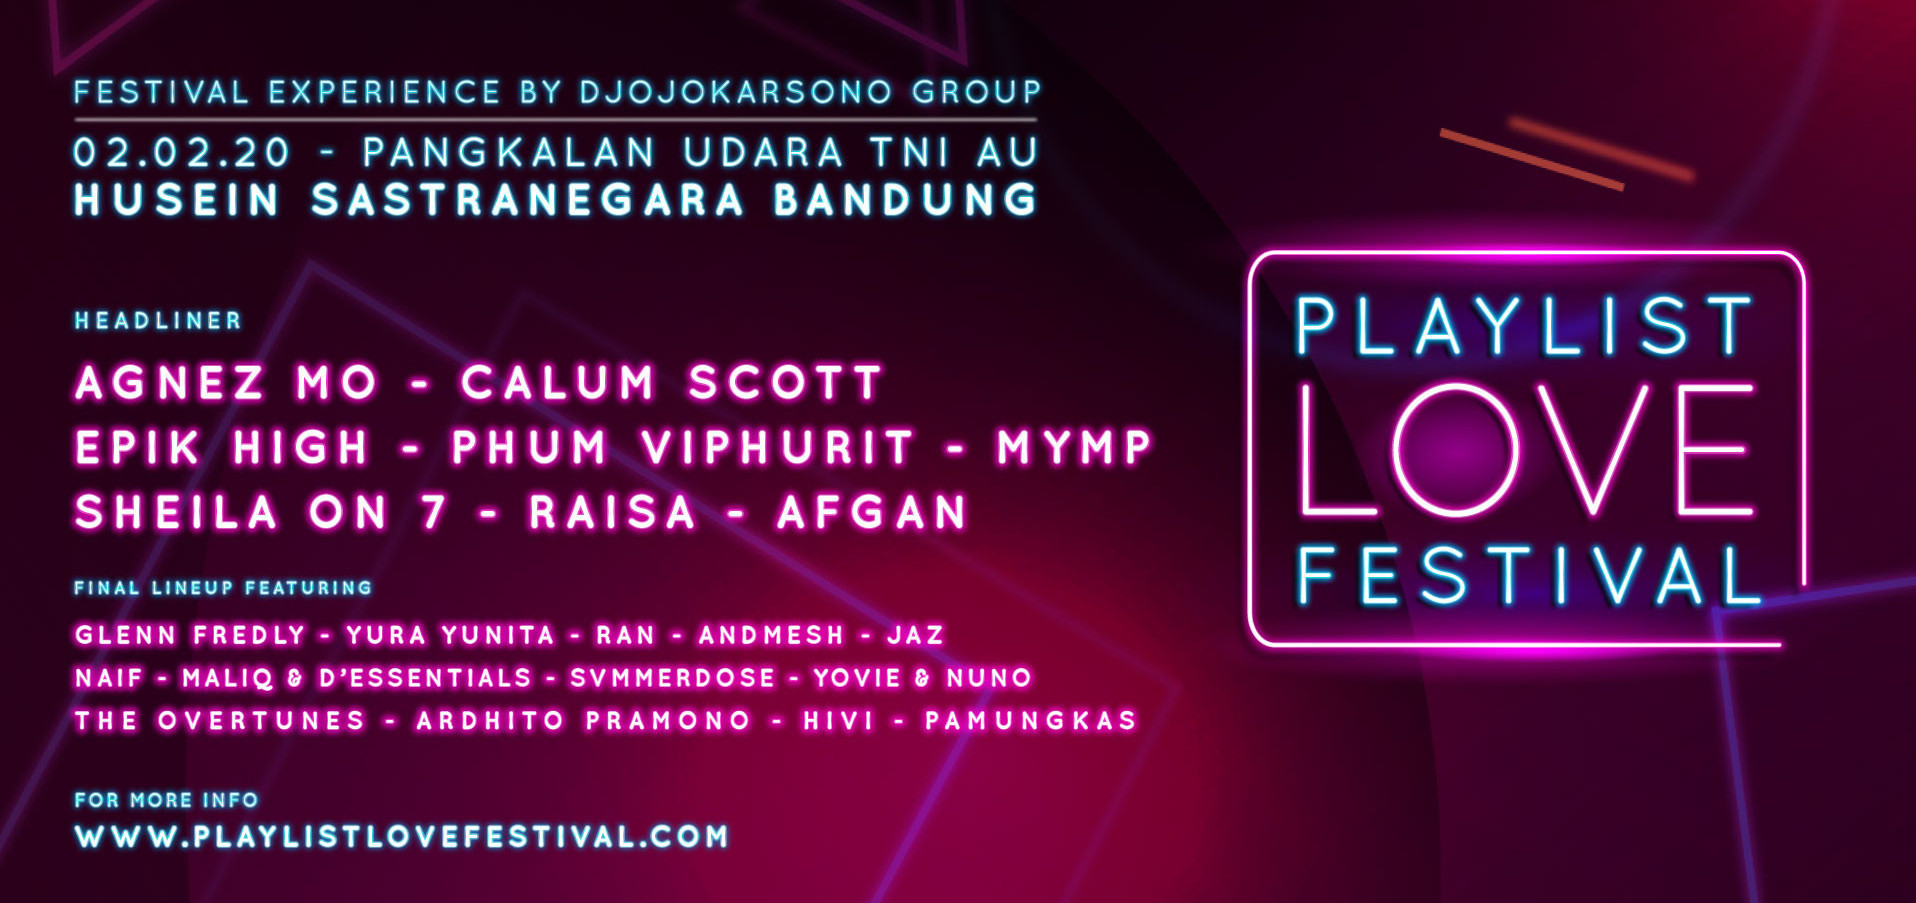 List of Music Concerts and Festivals in Indonesia 2020